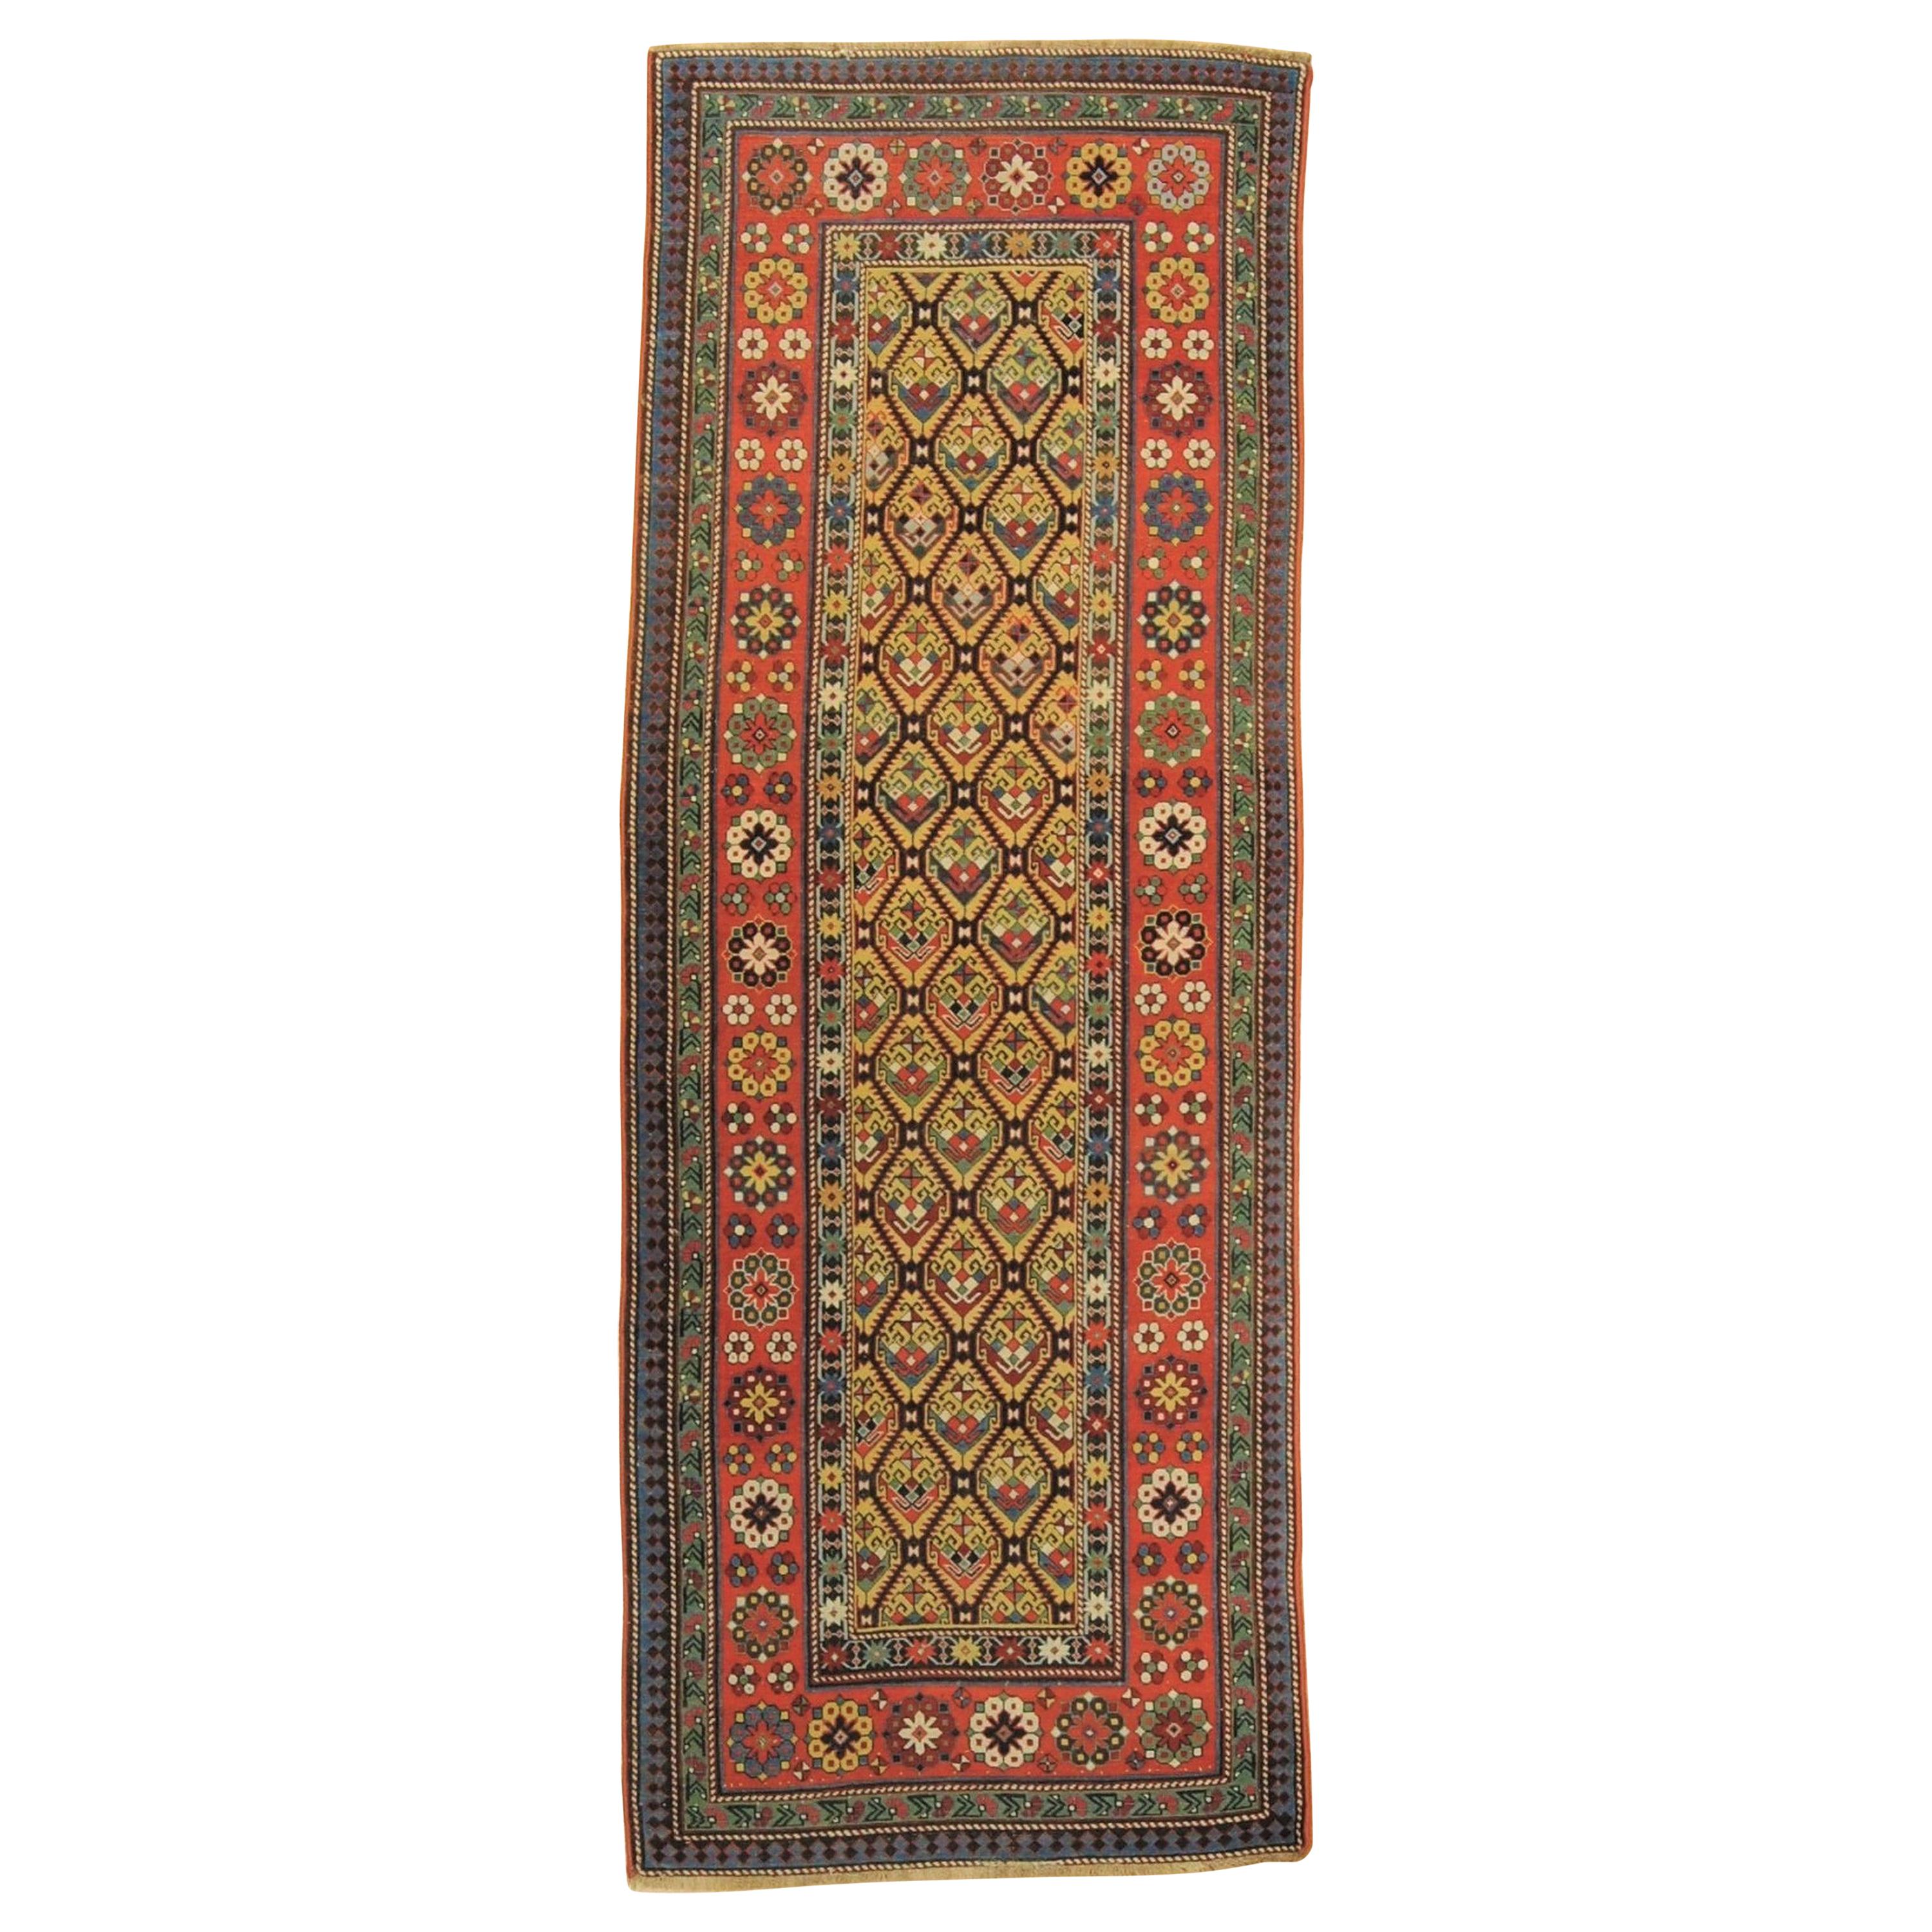 19th Century Yellow Green Red Caucasian Talish Rug, € 7500 For Sale